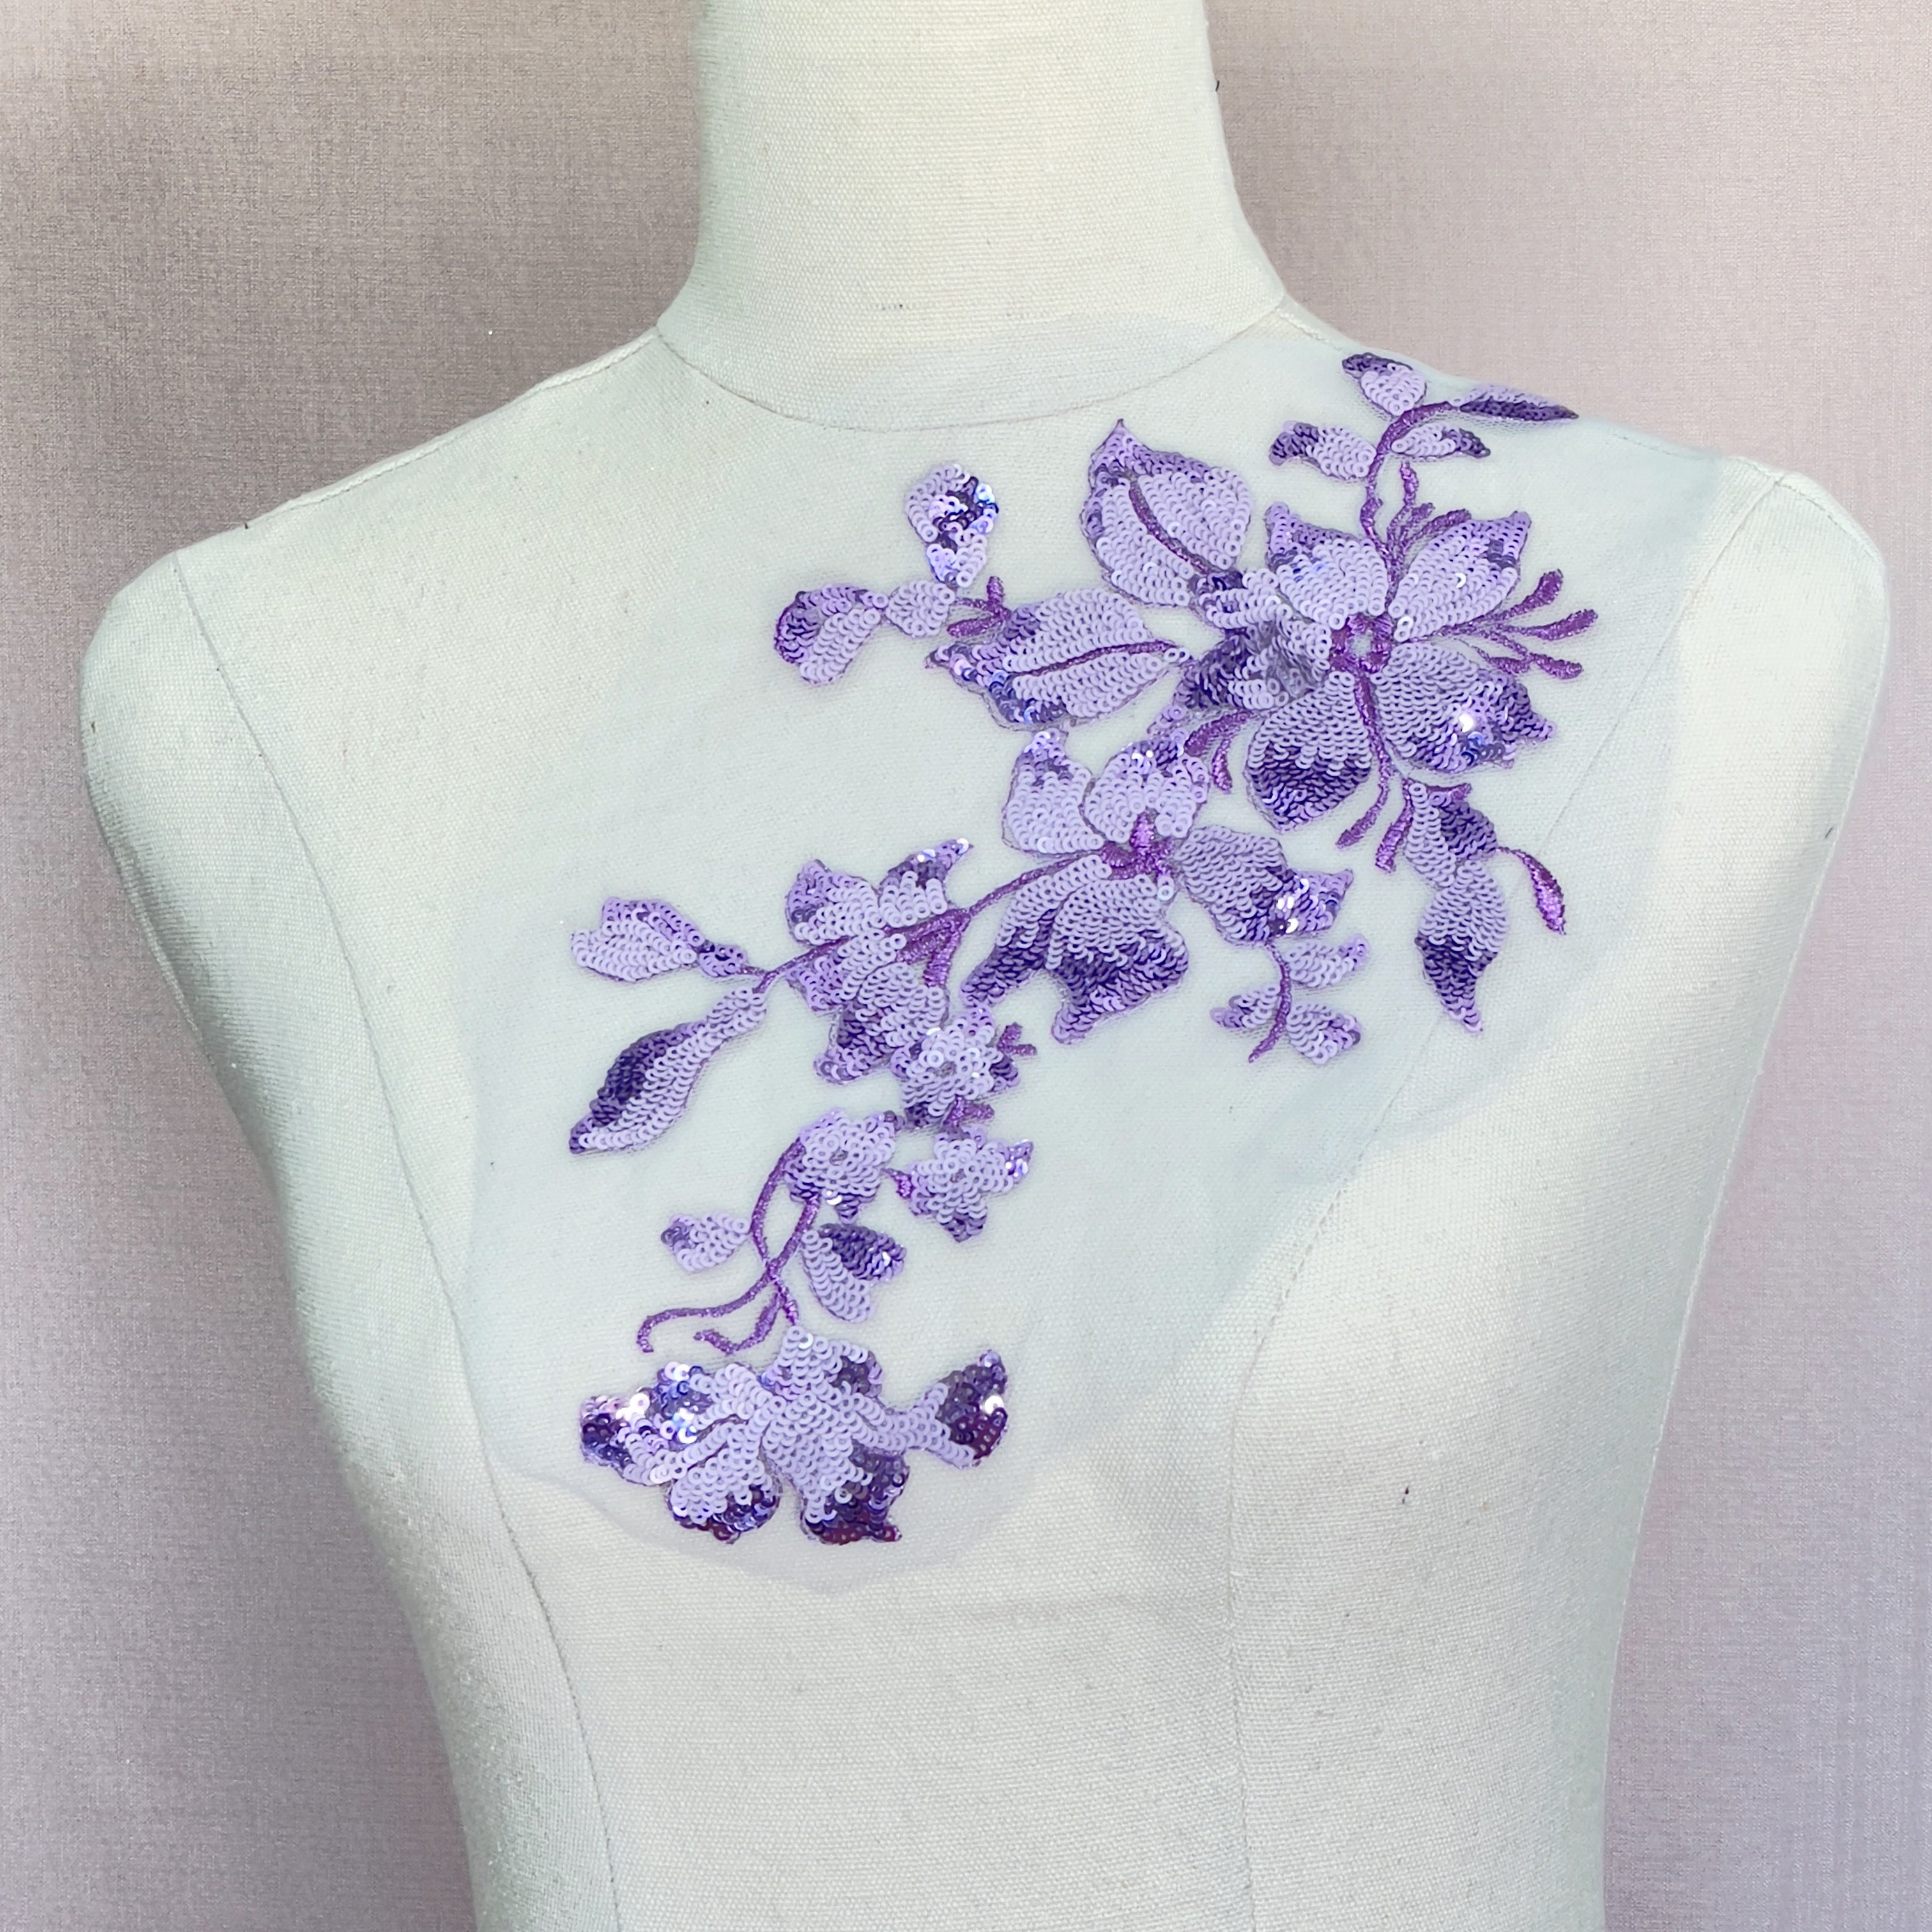 Fully sequinned single floral applique in varying shades of light and mid purple on a white net backing.  The stems and leaves of the flowers are embroidered with metallic purple thread.   